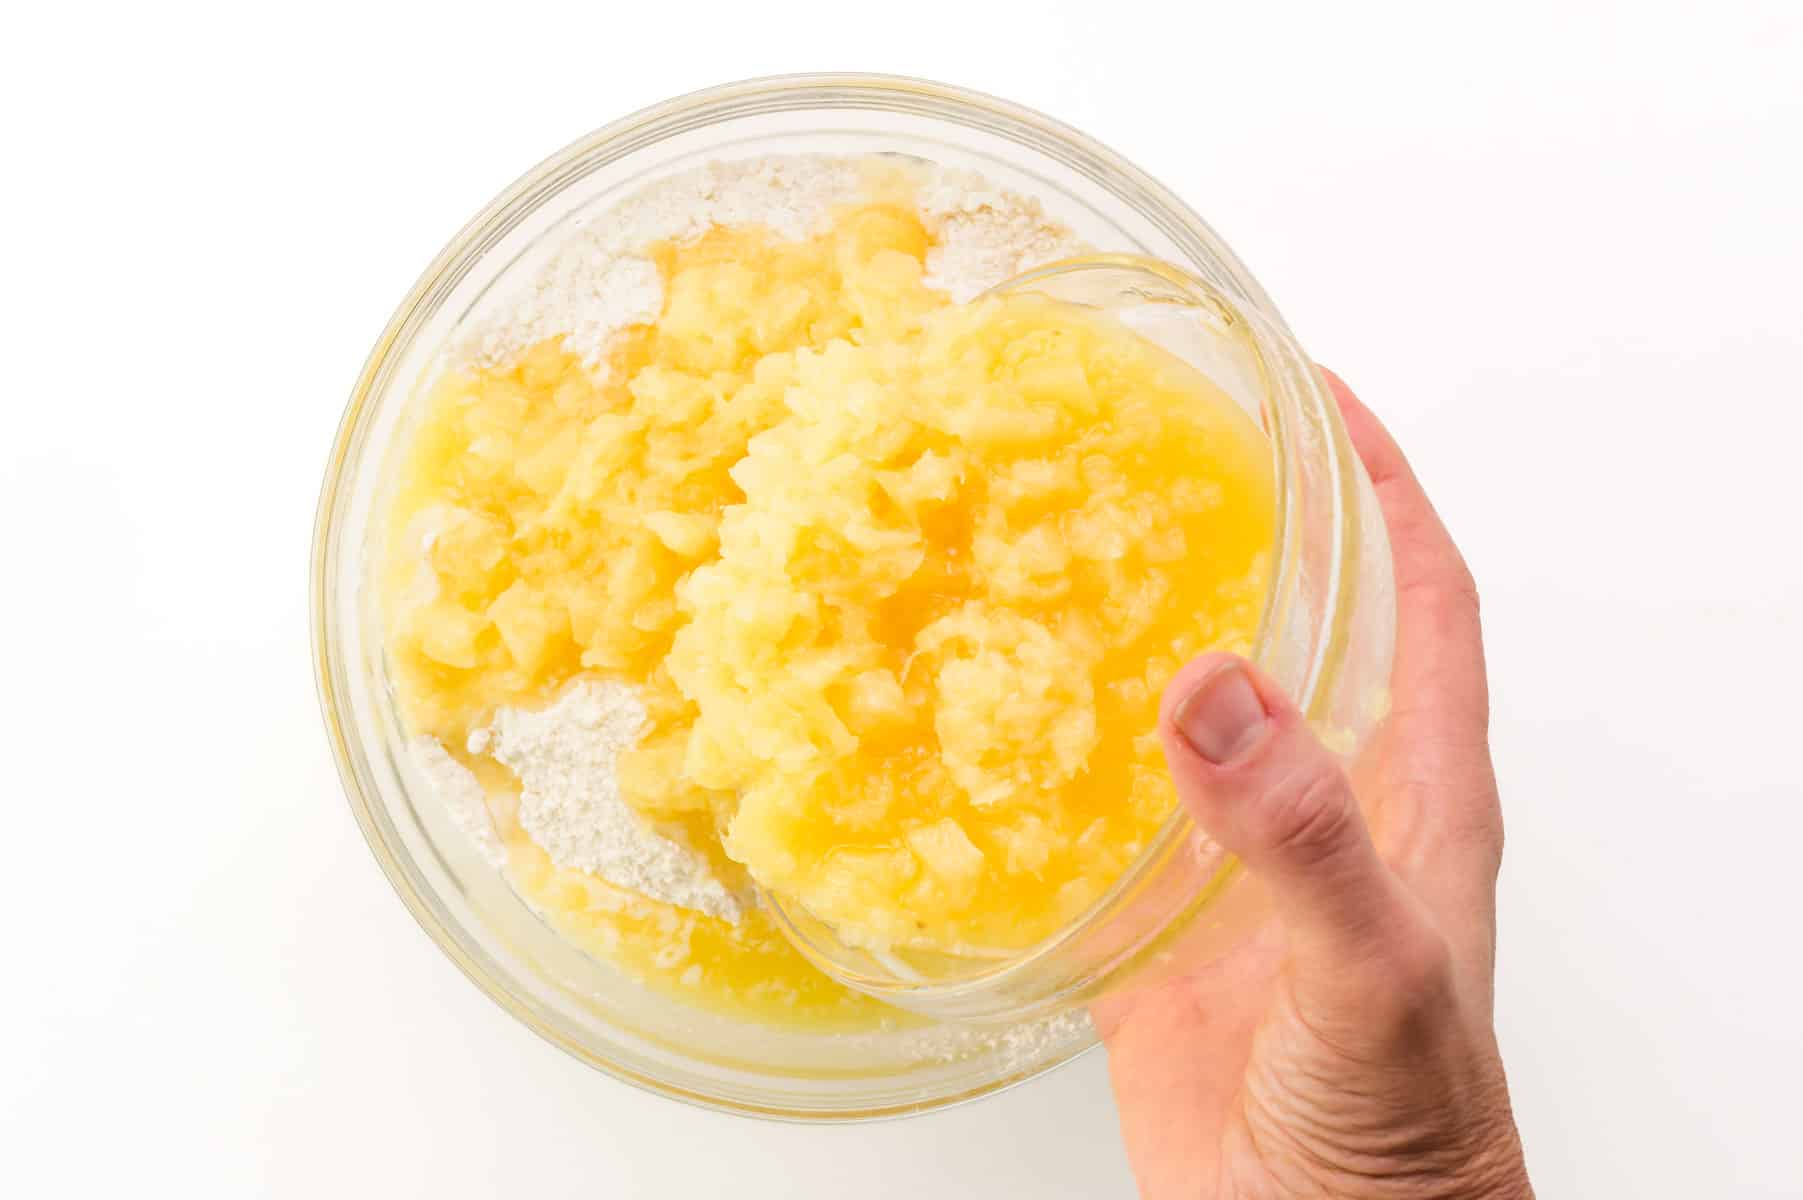 A hand holds a bowl with crushed pineapple, pouring into a bowl with flour.